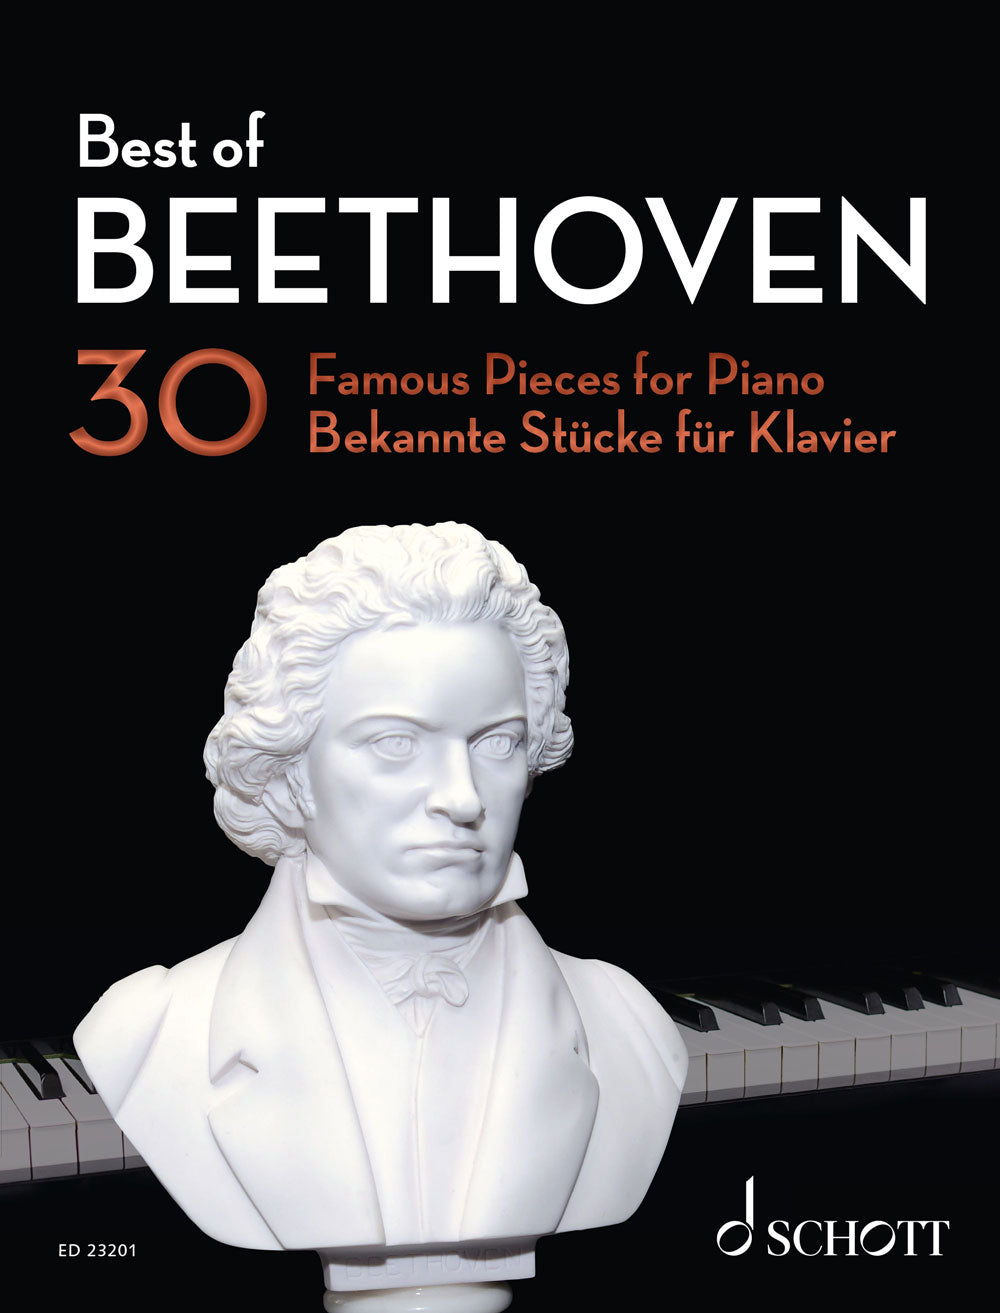 Best of Beethoven: 30 Famous Pieces for Piano 貝多芬